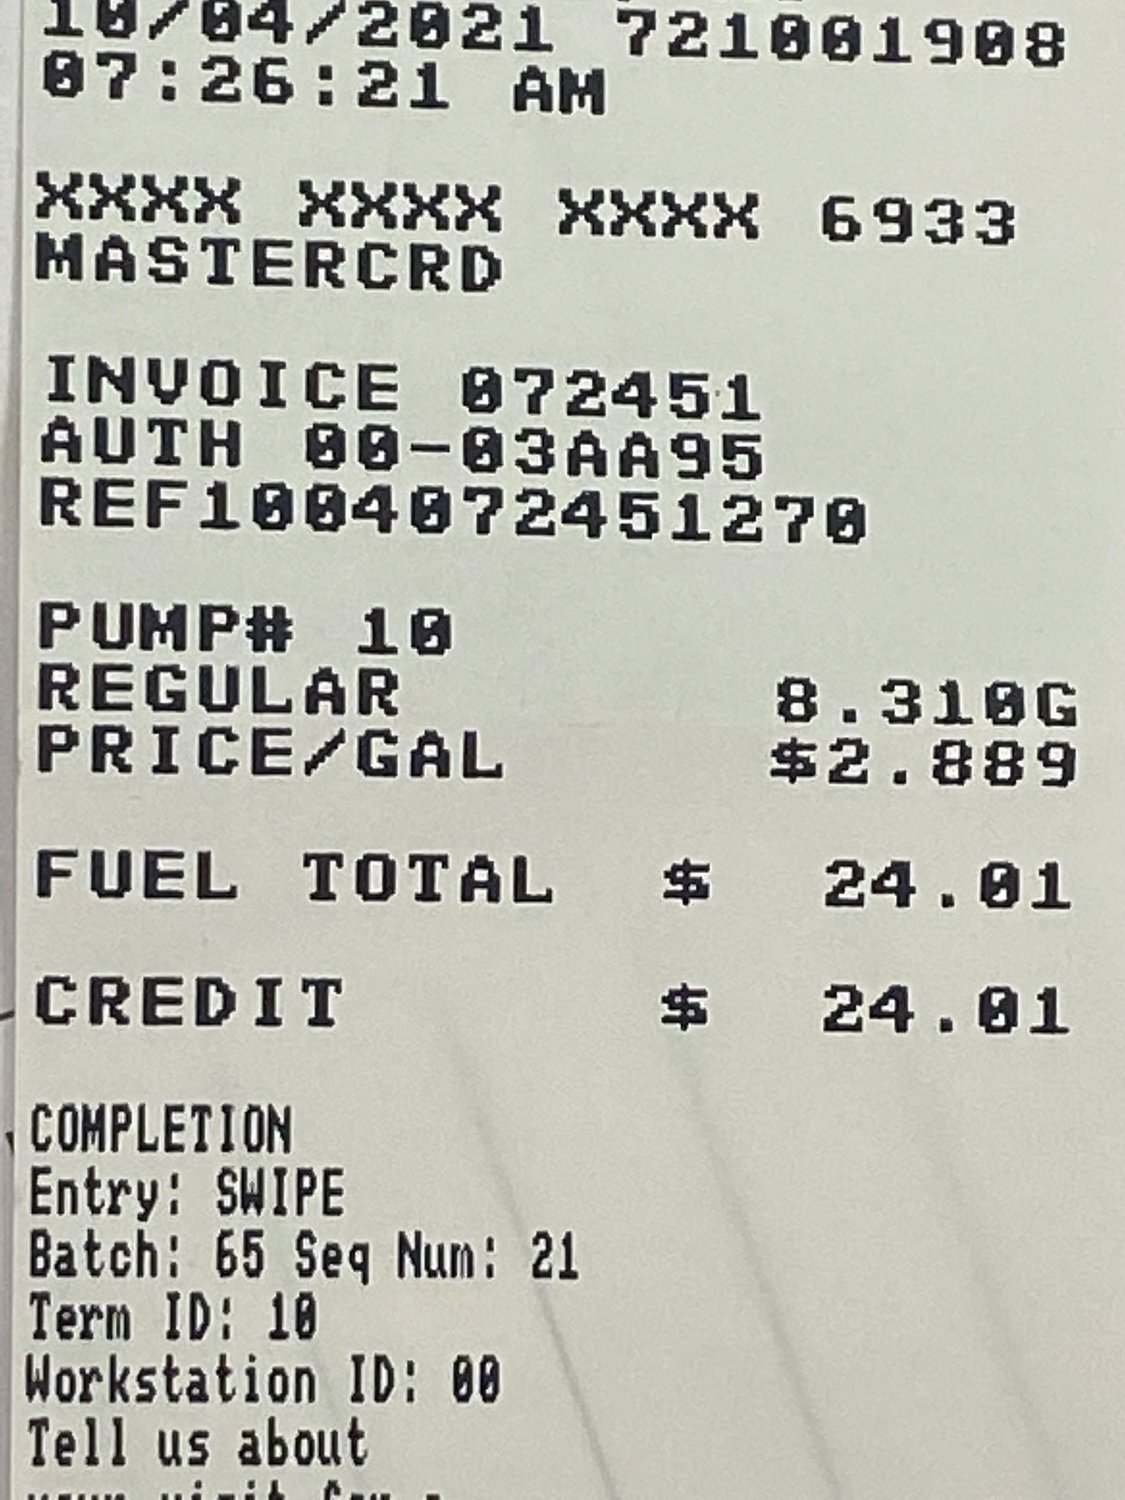 Are Gas Receipts Tax Deductible